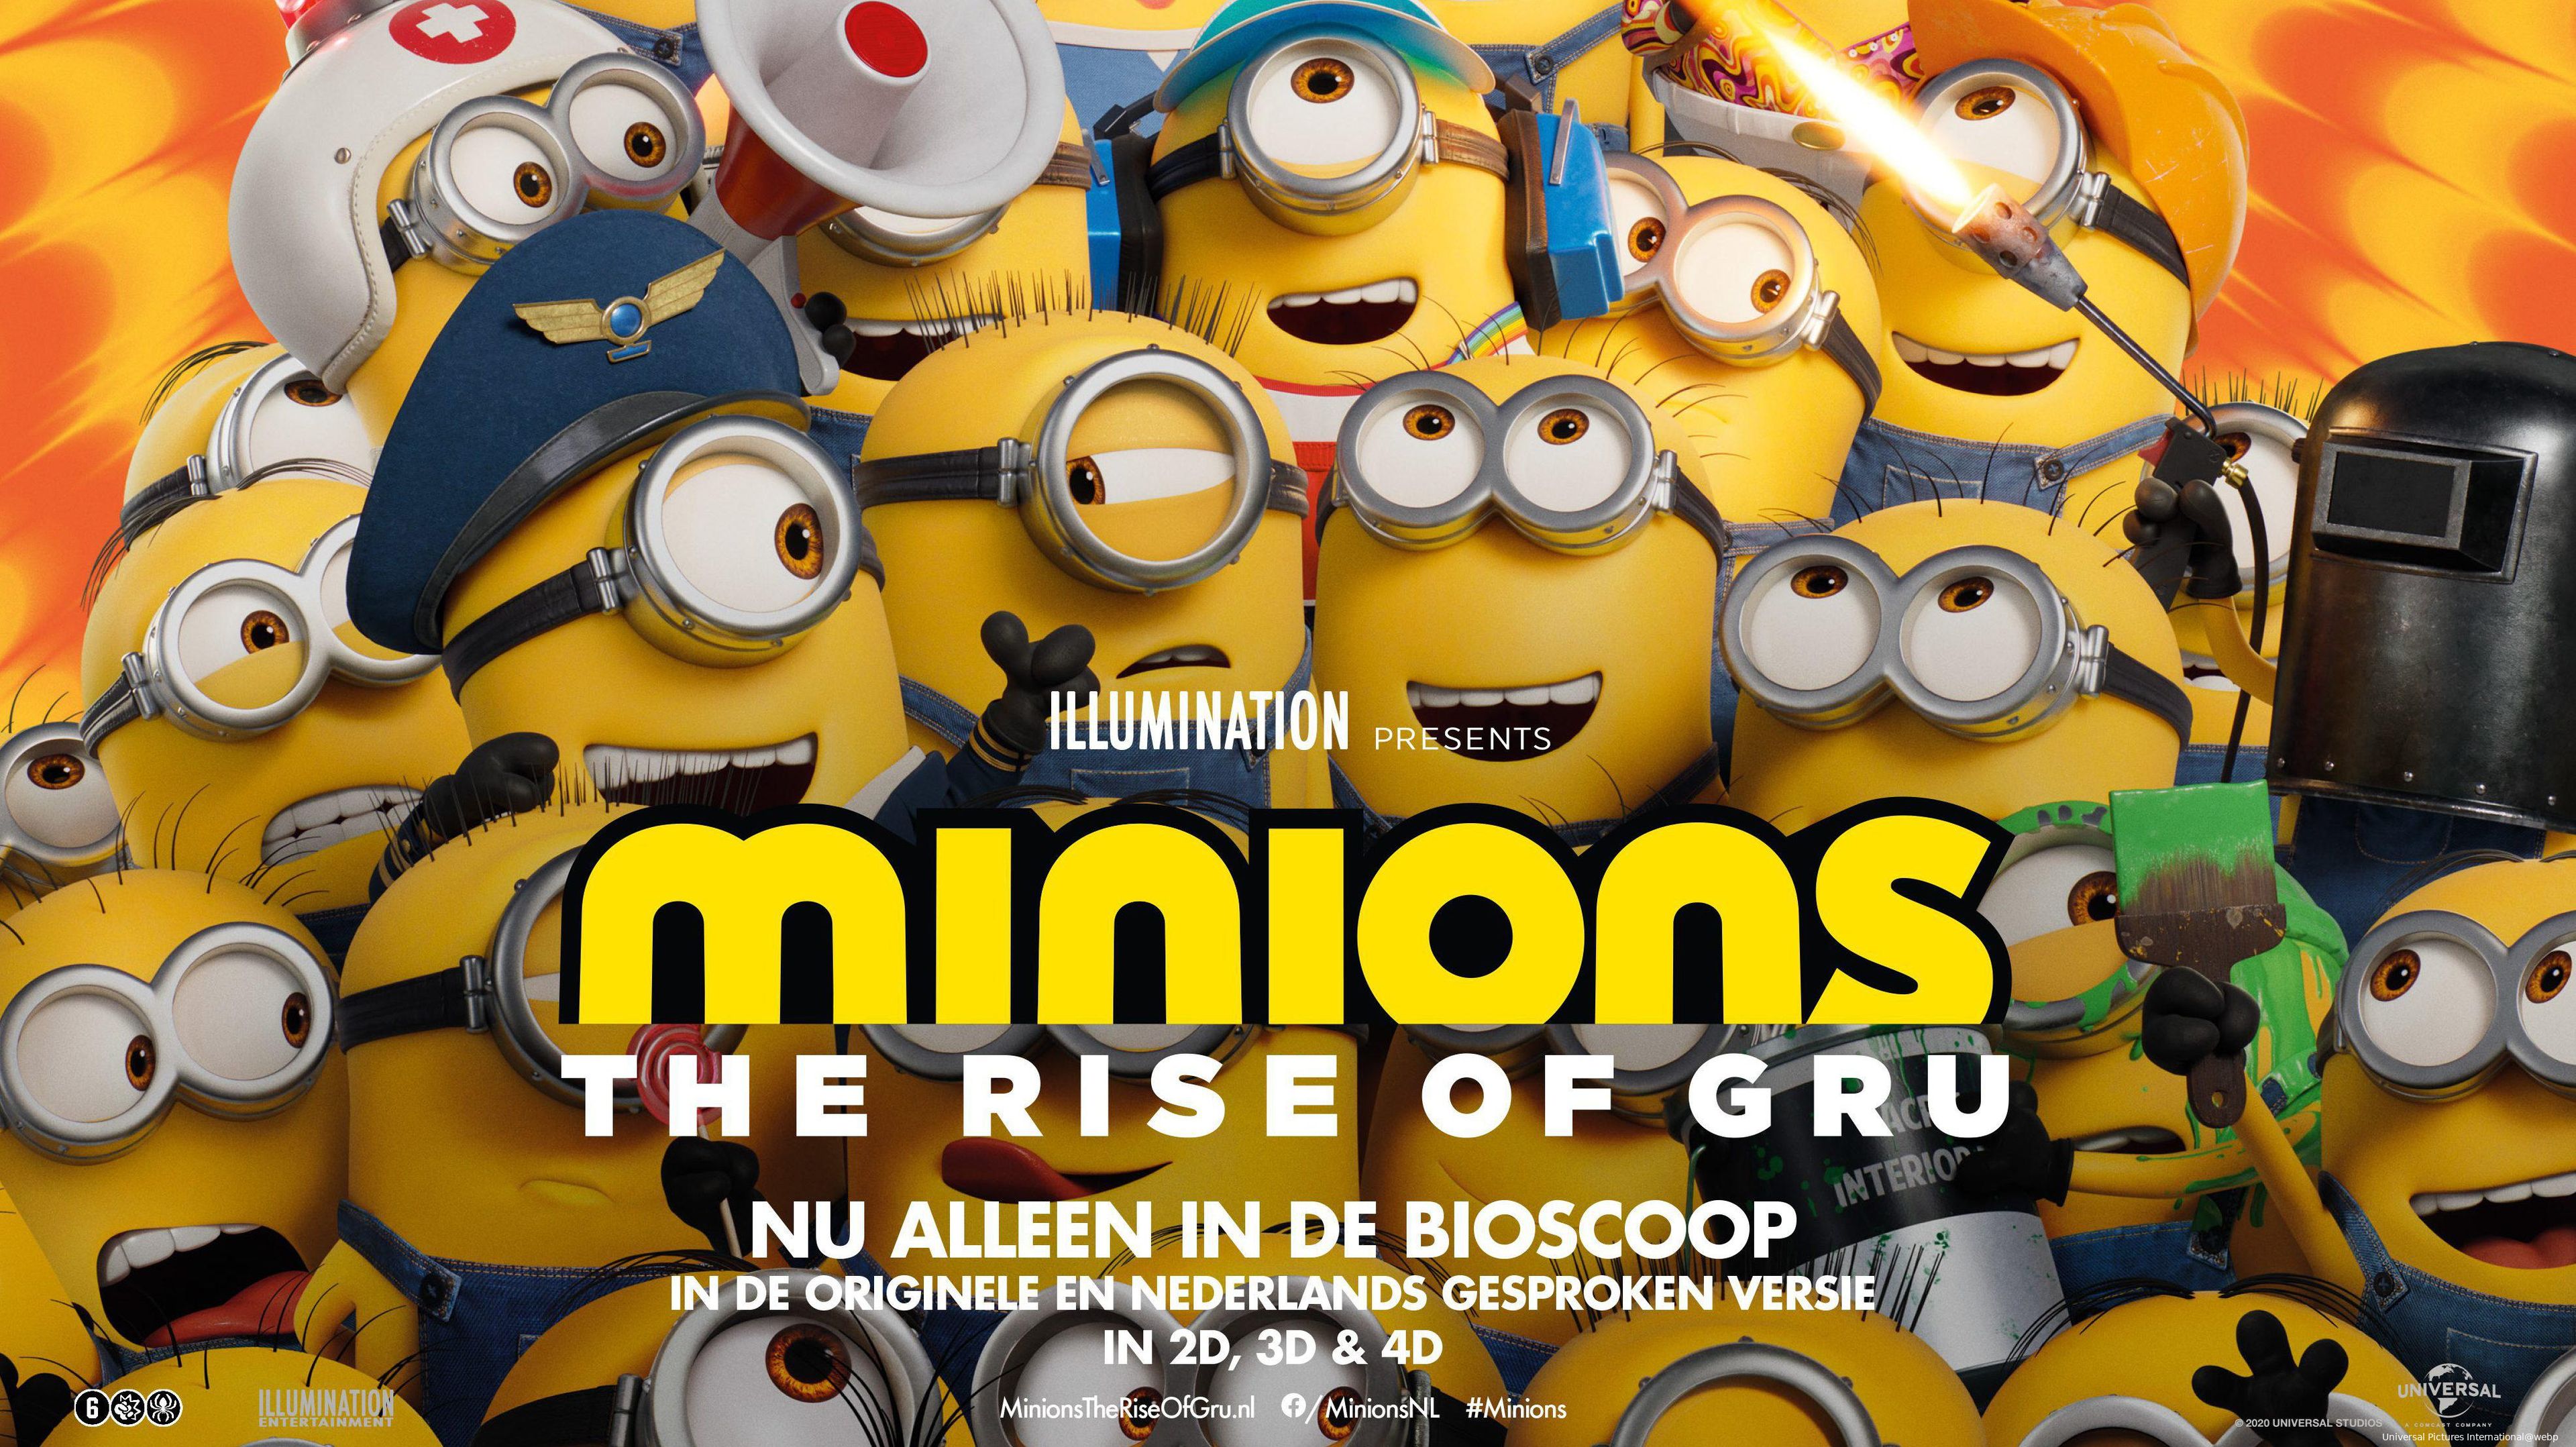 minions the rise of gru ps 1 jpg sd high copyright 2022 universal pictures all rights reserved 1f1657289137